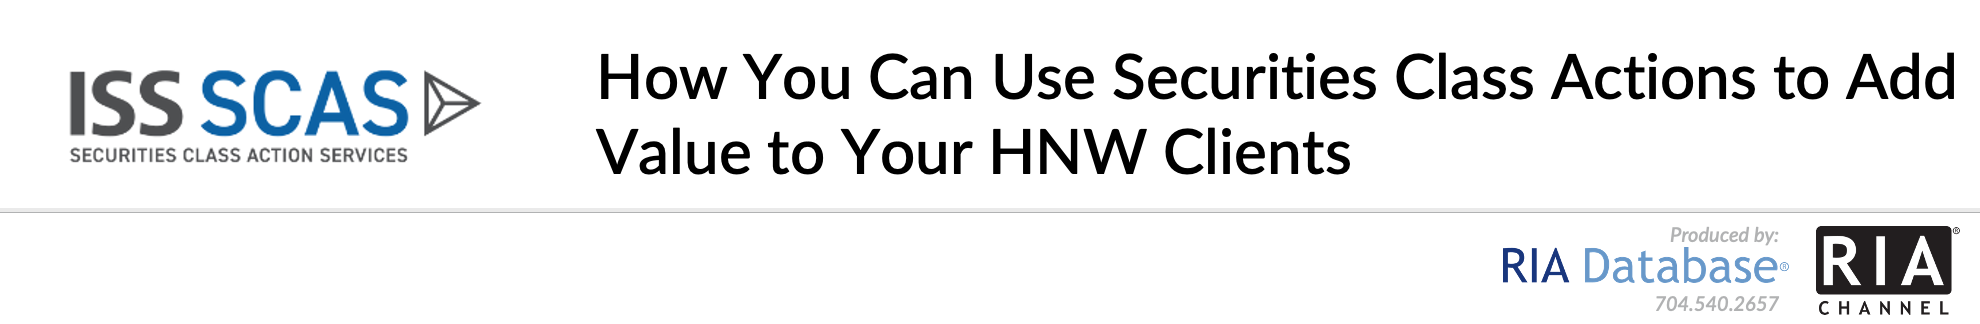 How You Can Use Securities Class Actions to Add Value to Your HNW Clients